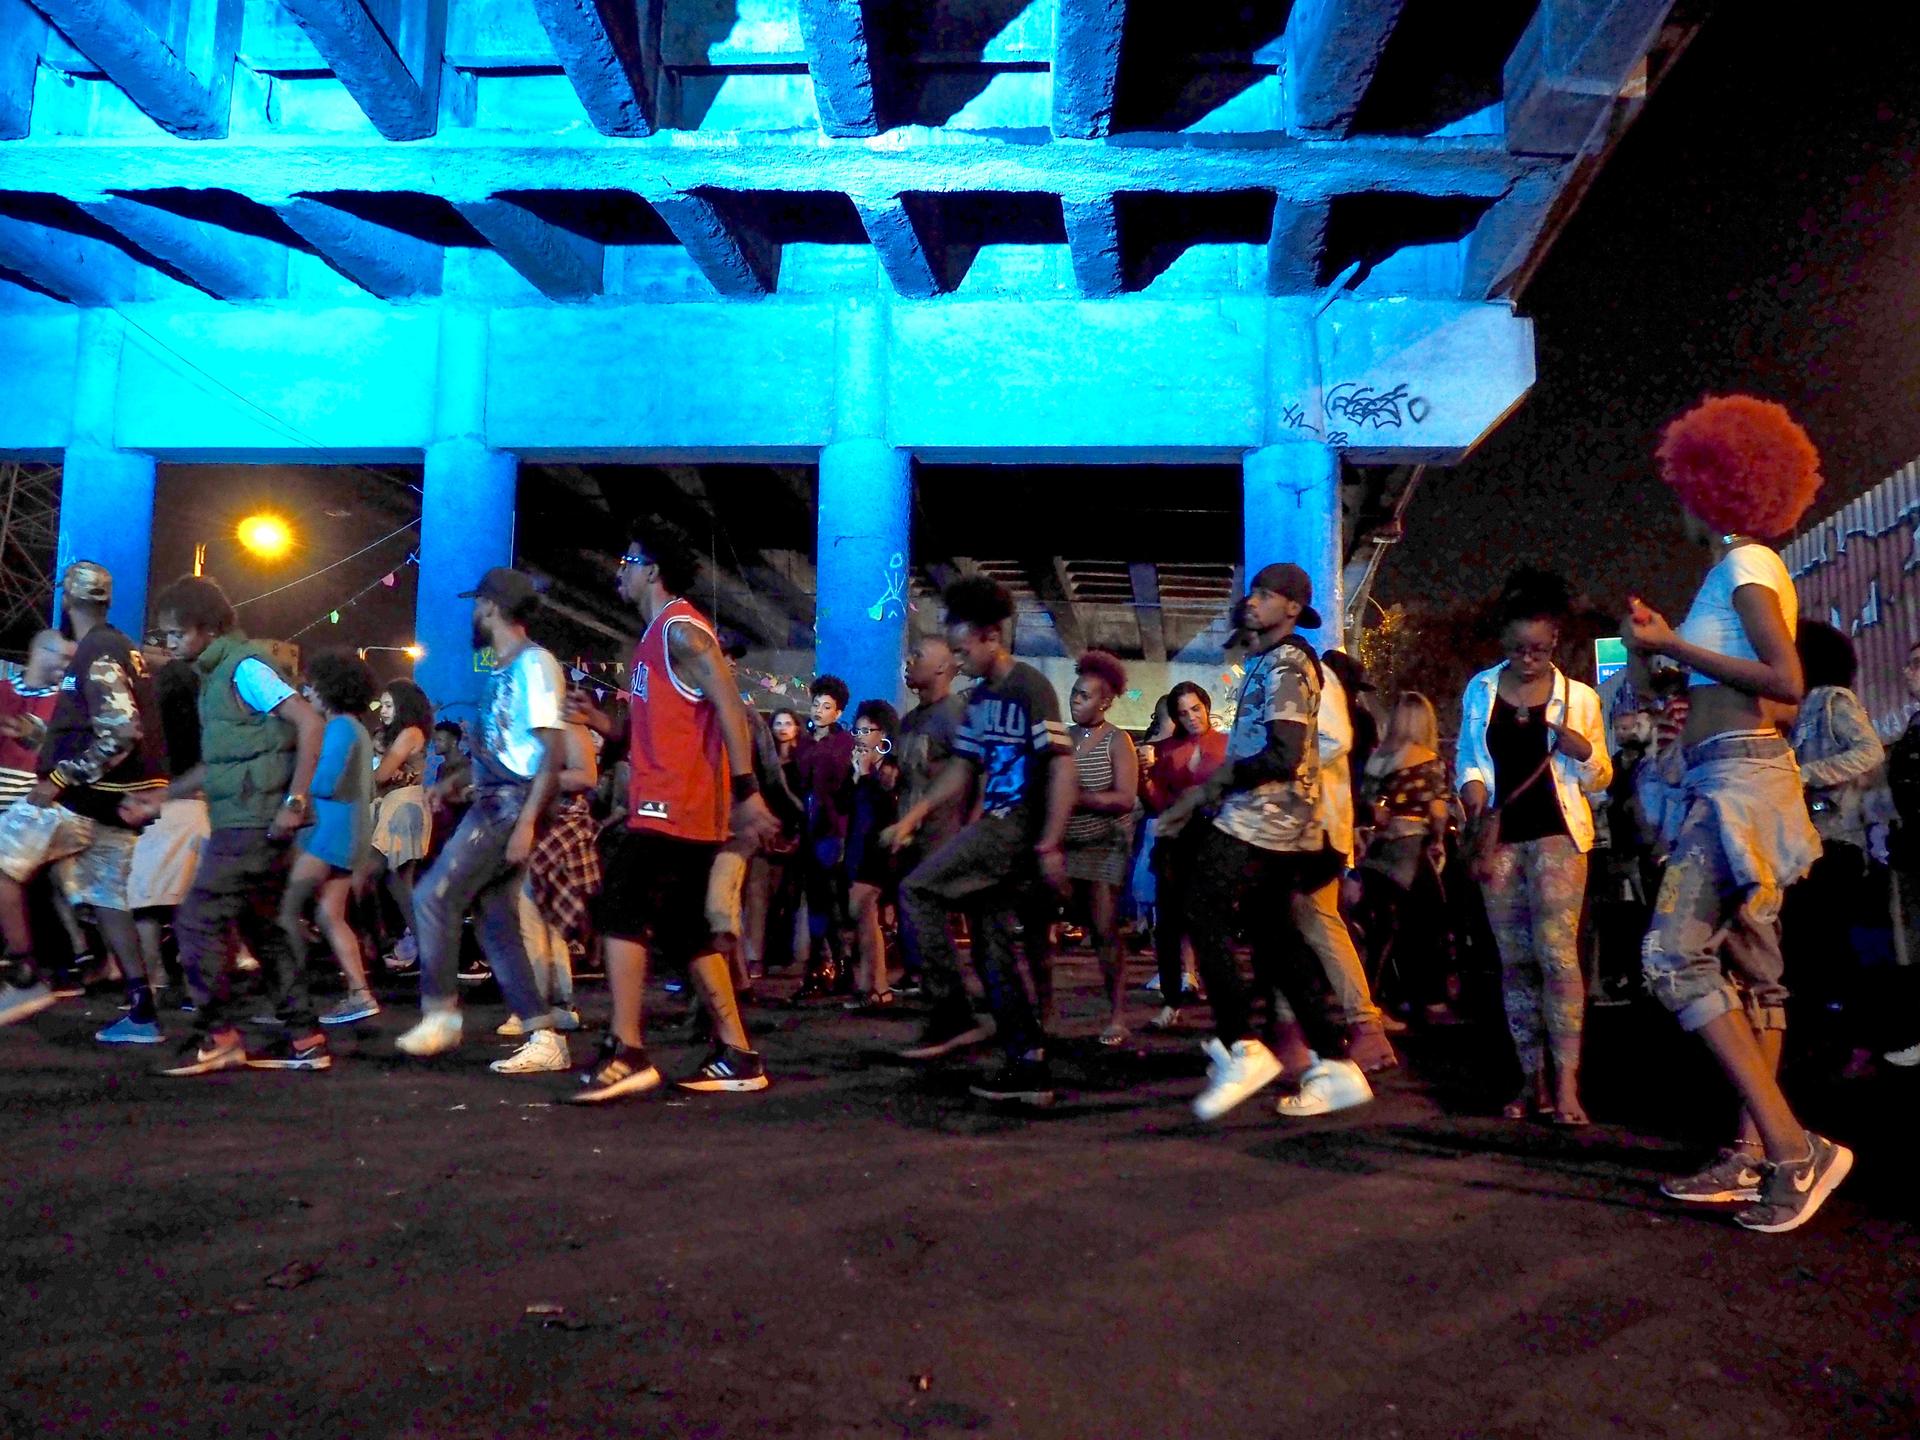 Madureira's Baile do Viaduto, the Dance at the Overpass, is affectionately simply called Dutão, or the big overpass, by regulars.